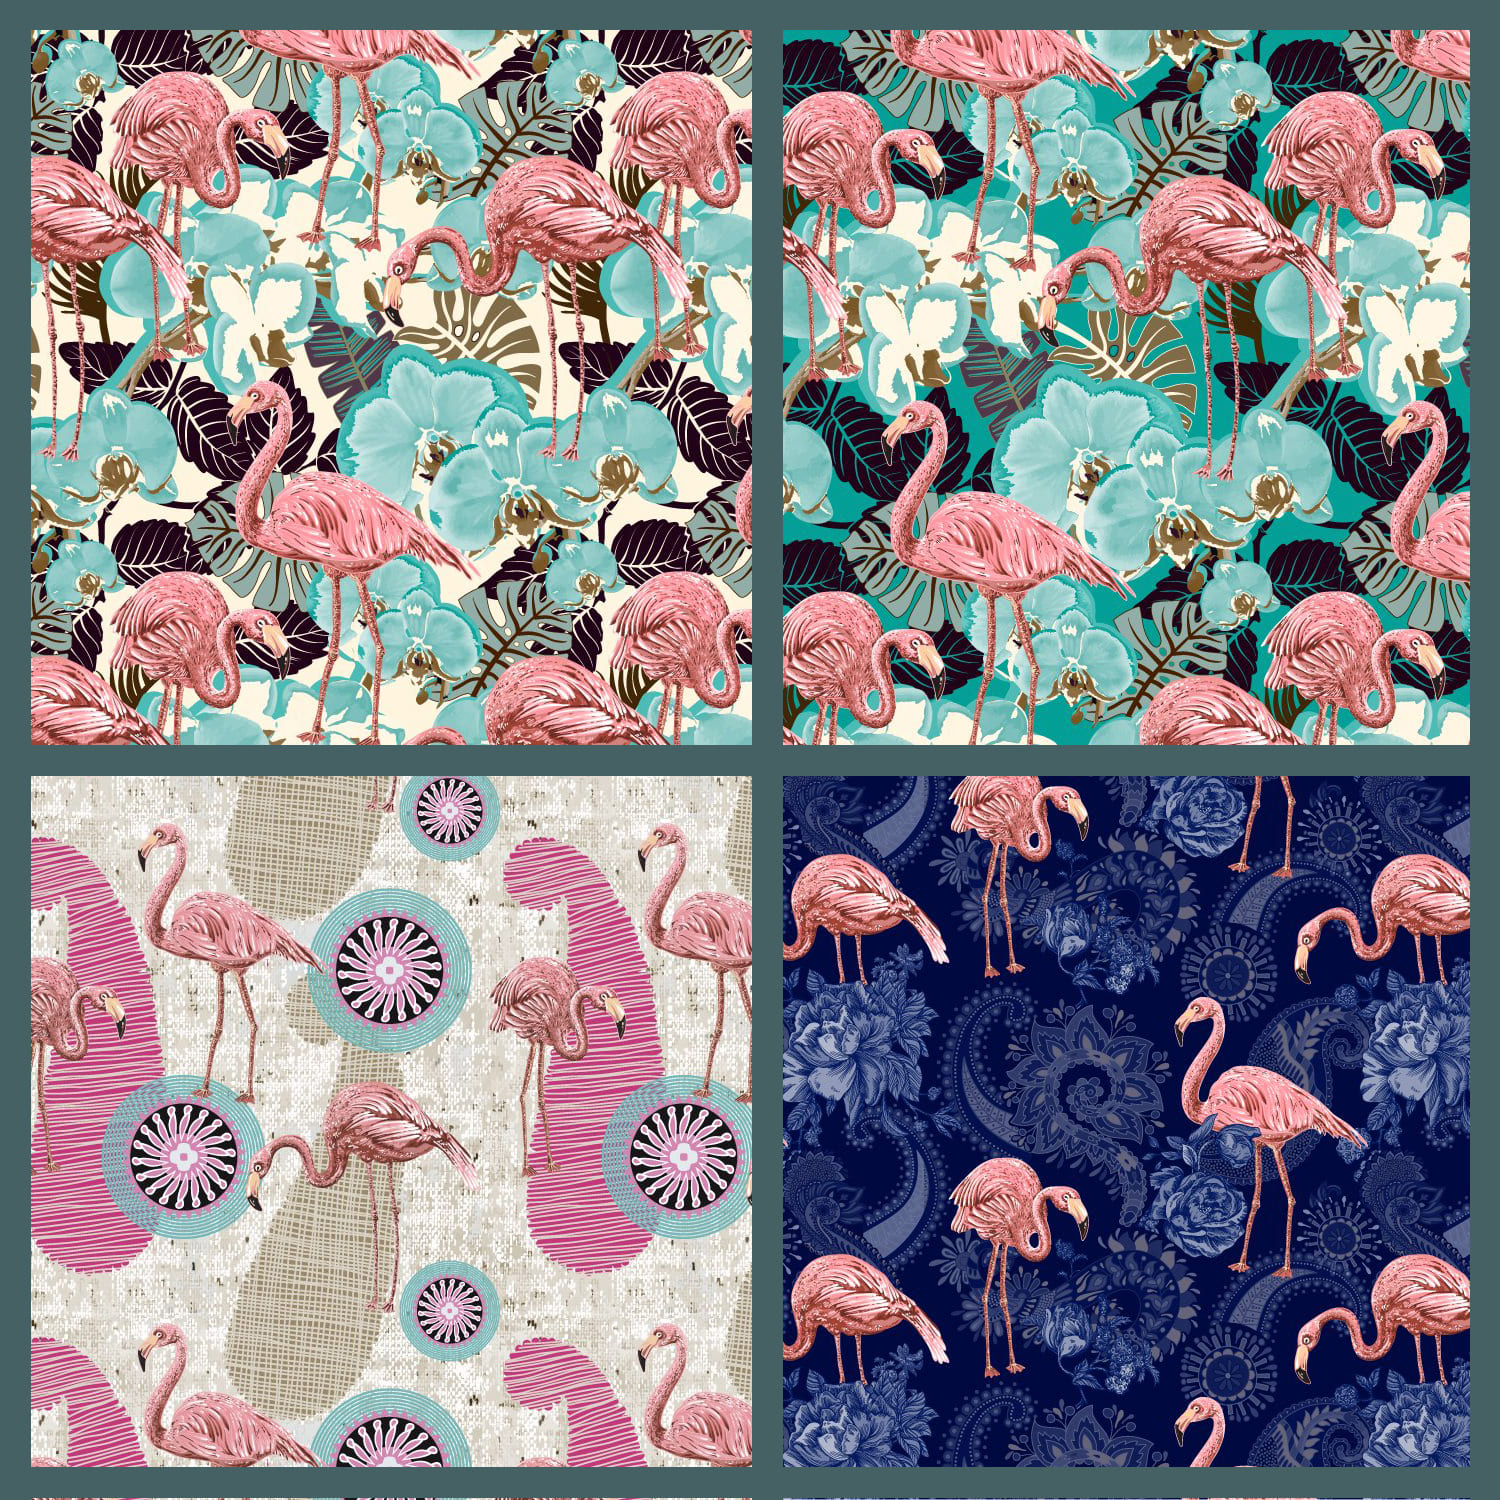 Pattern with flamingos cover.